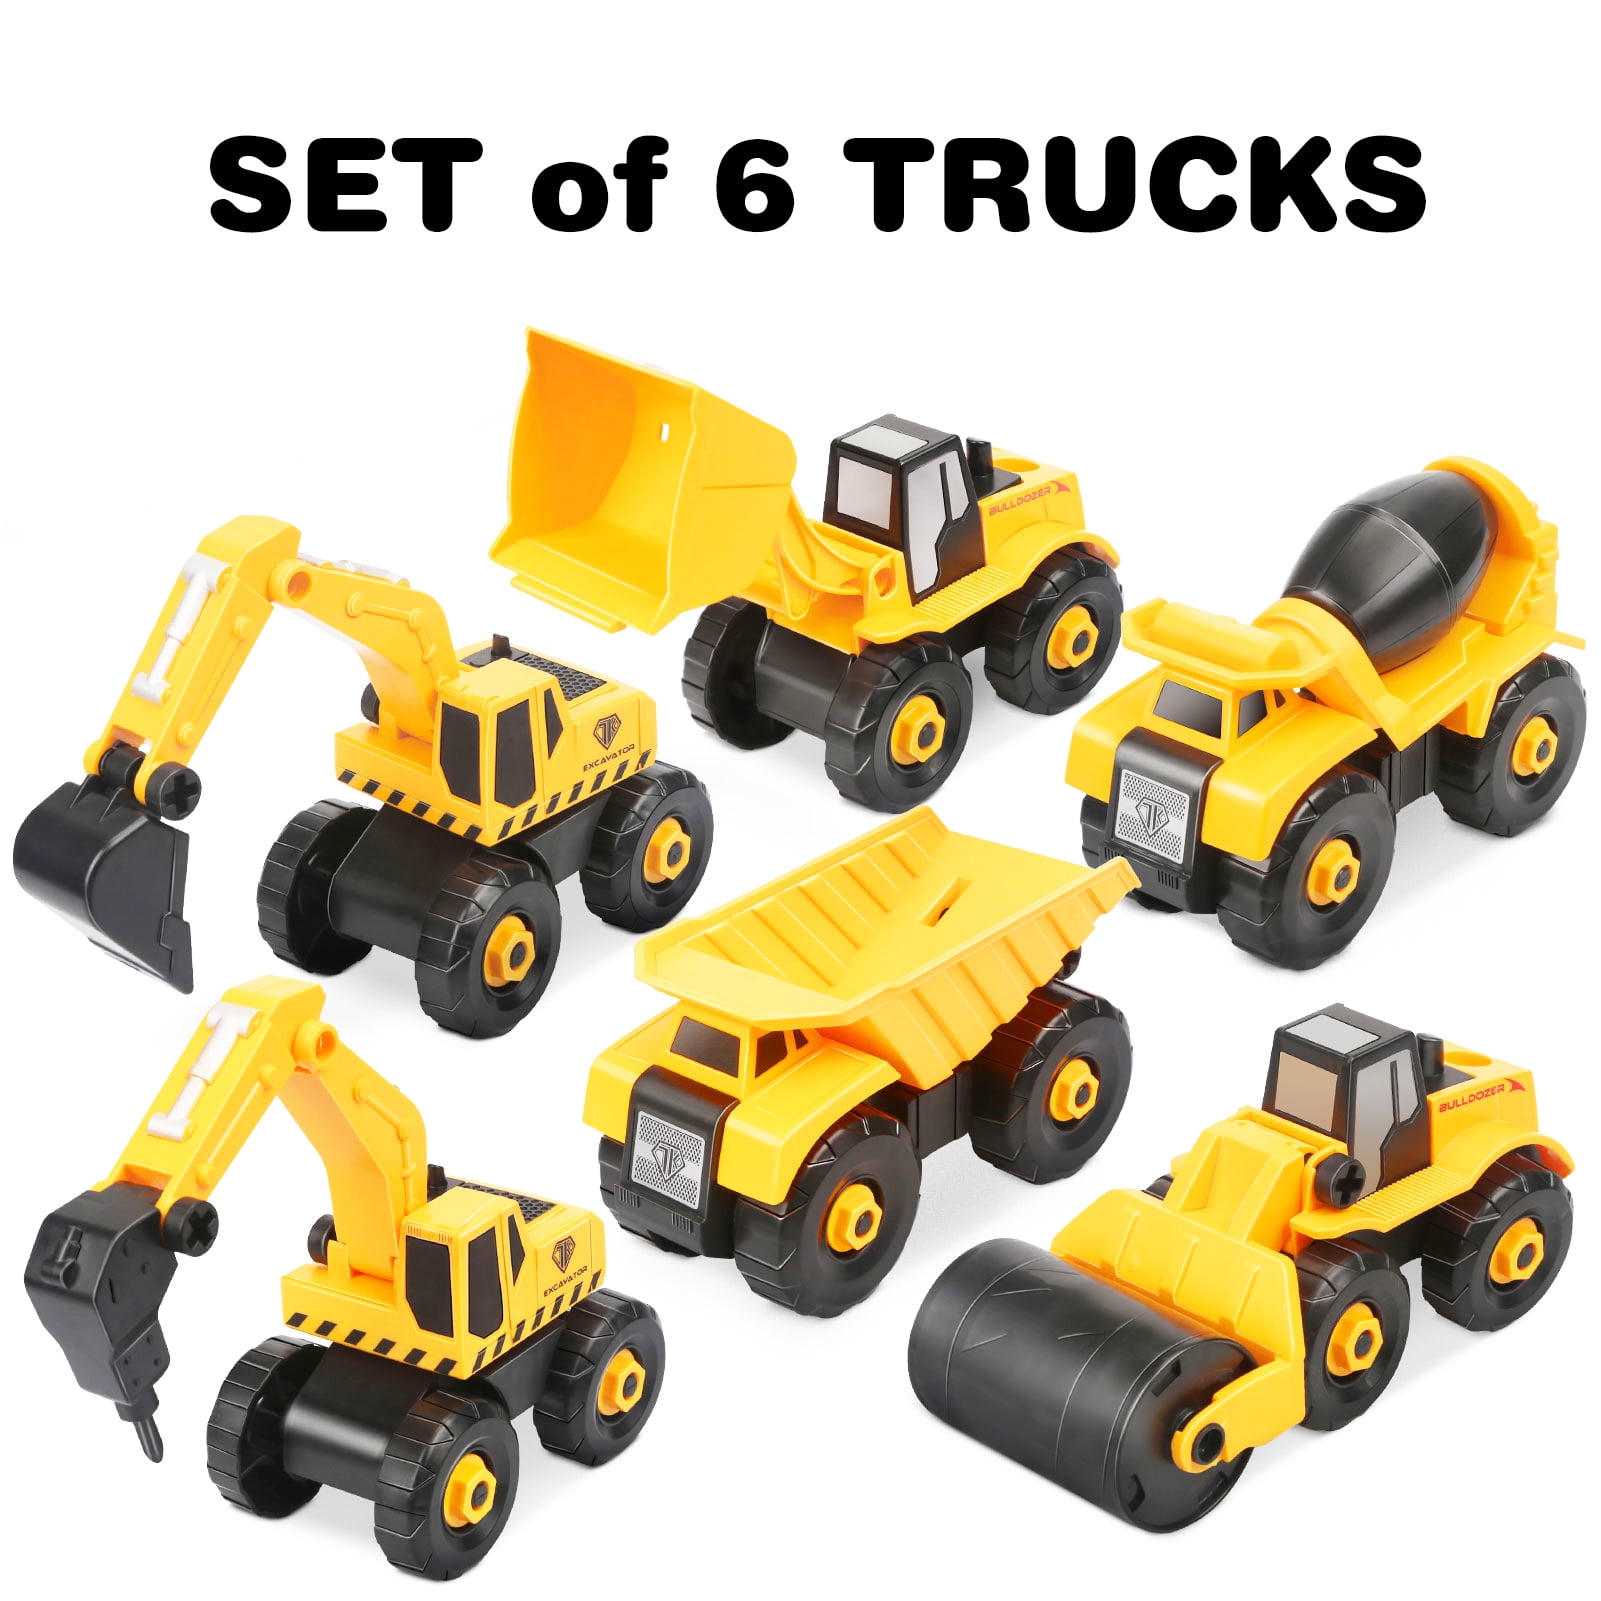 Joyreal Take Apart Construction Truck Toy for Boys Age 3 4 5,6 in 1 Vehicle  Set for Kids DIY Educational Gifts for Girls